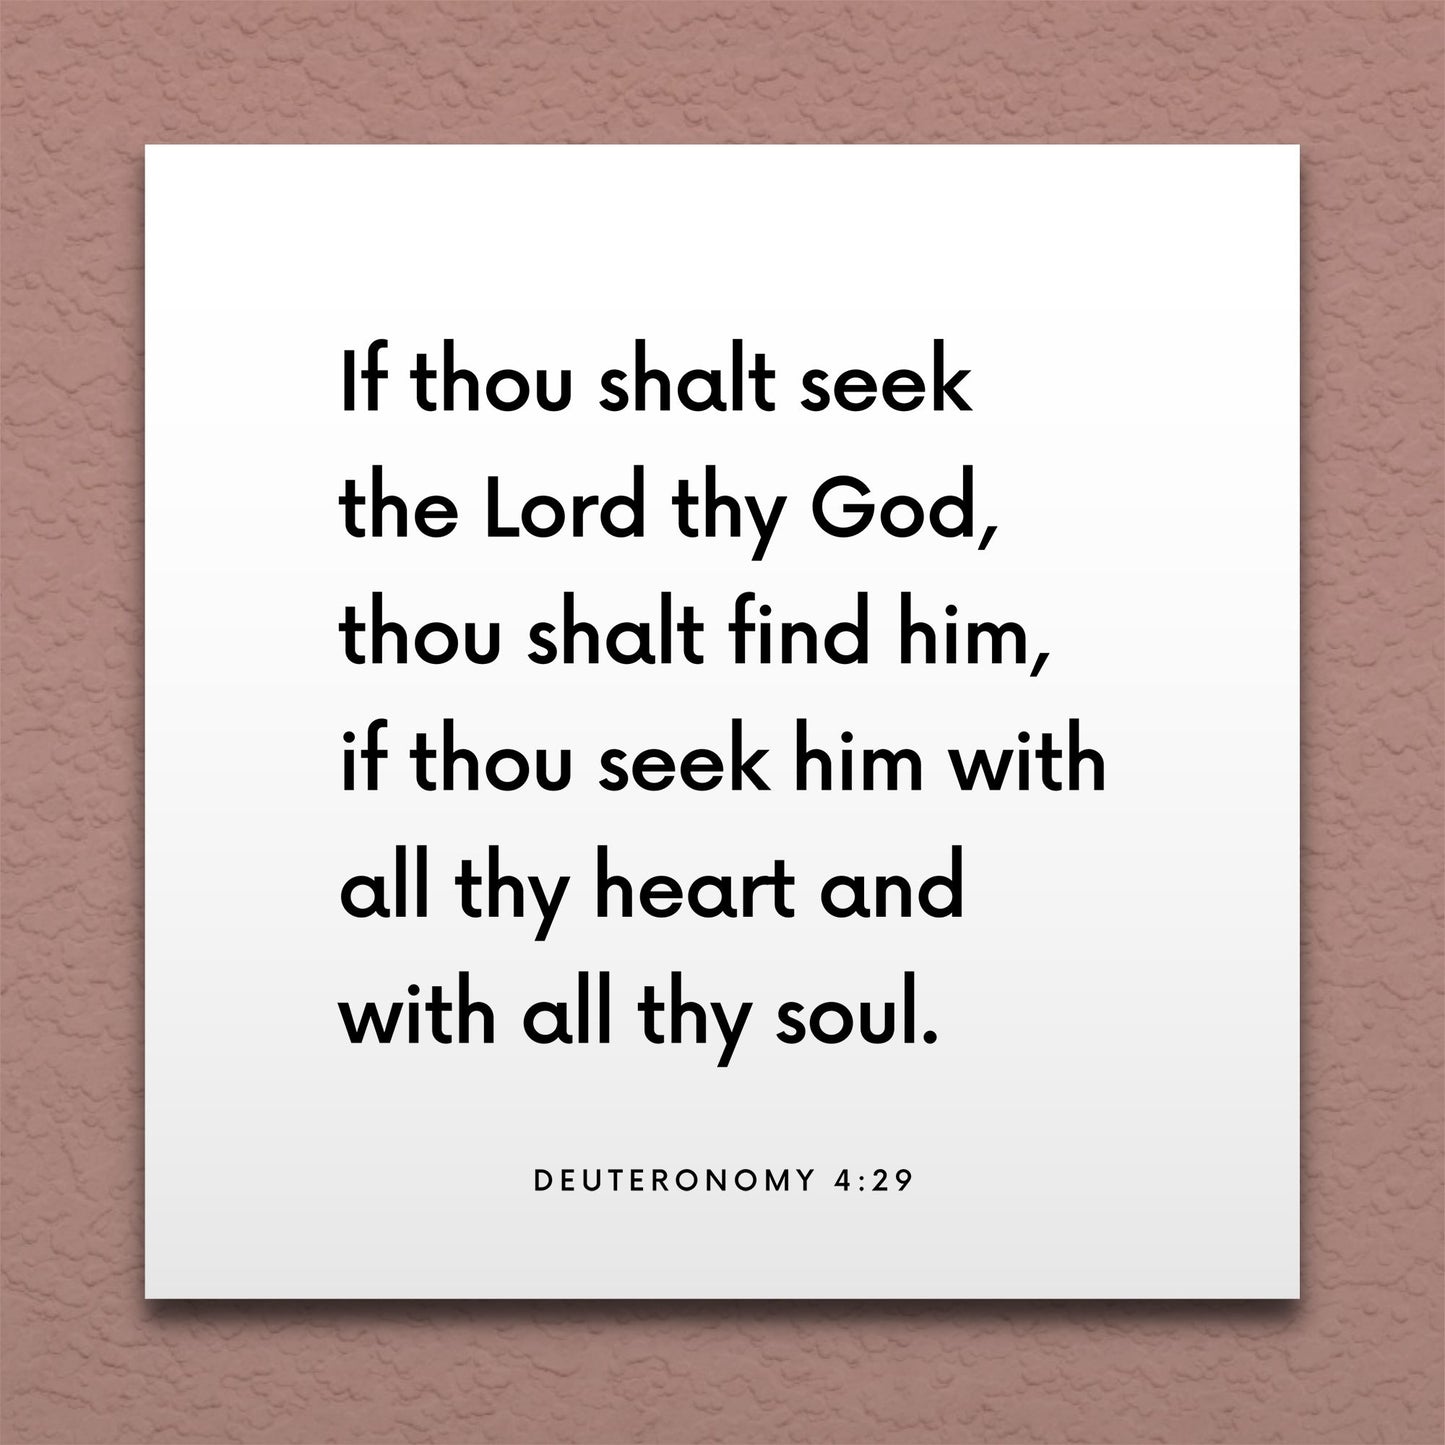 Wall-mounted scripture tile for Deuteronomy 4:29 - "If thou shalt seek the Lord thy God, thou shalt find him"